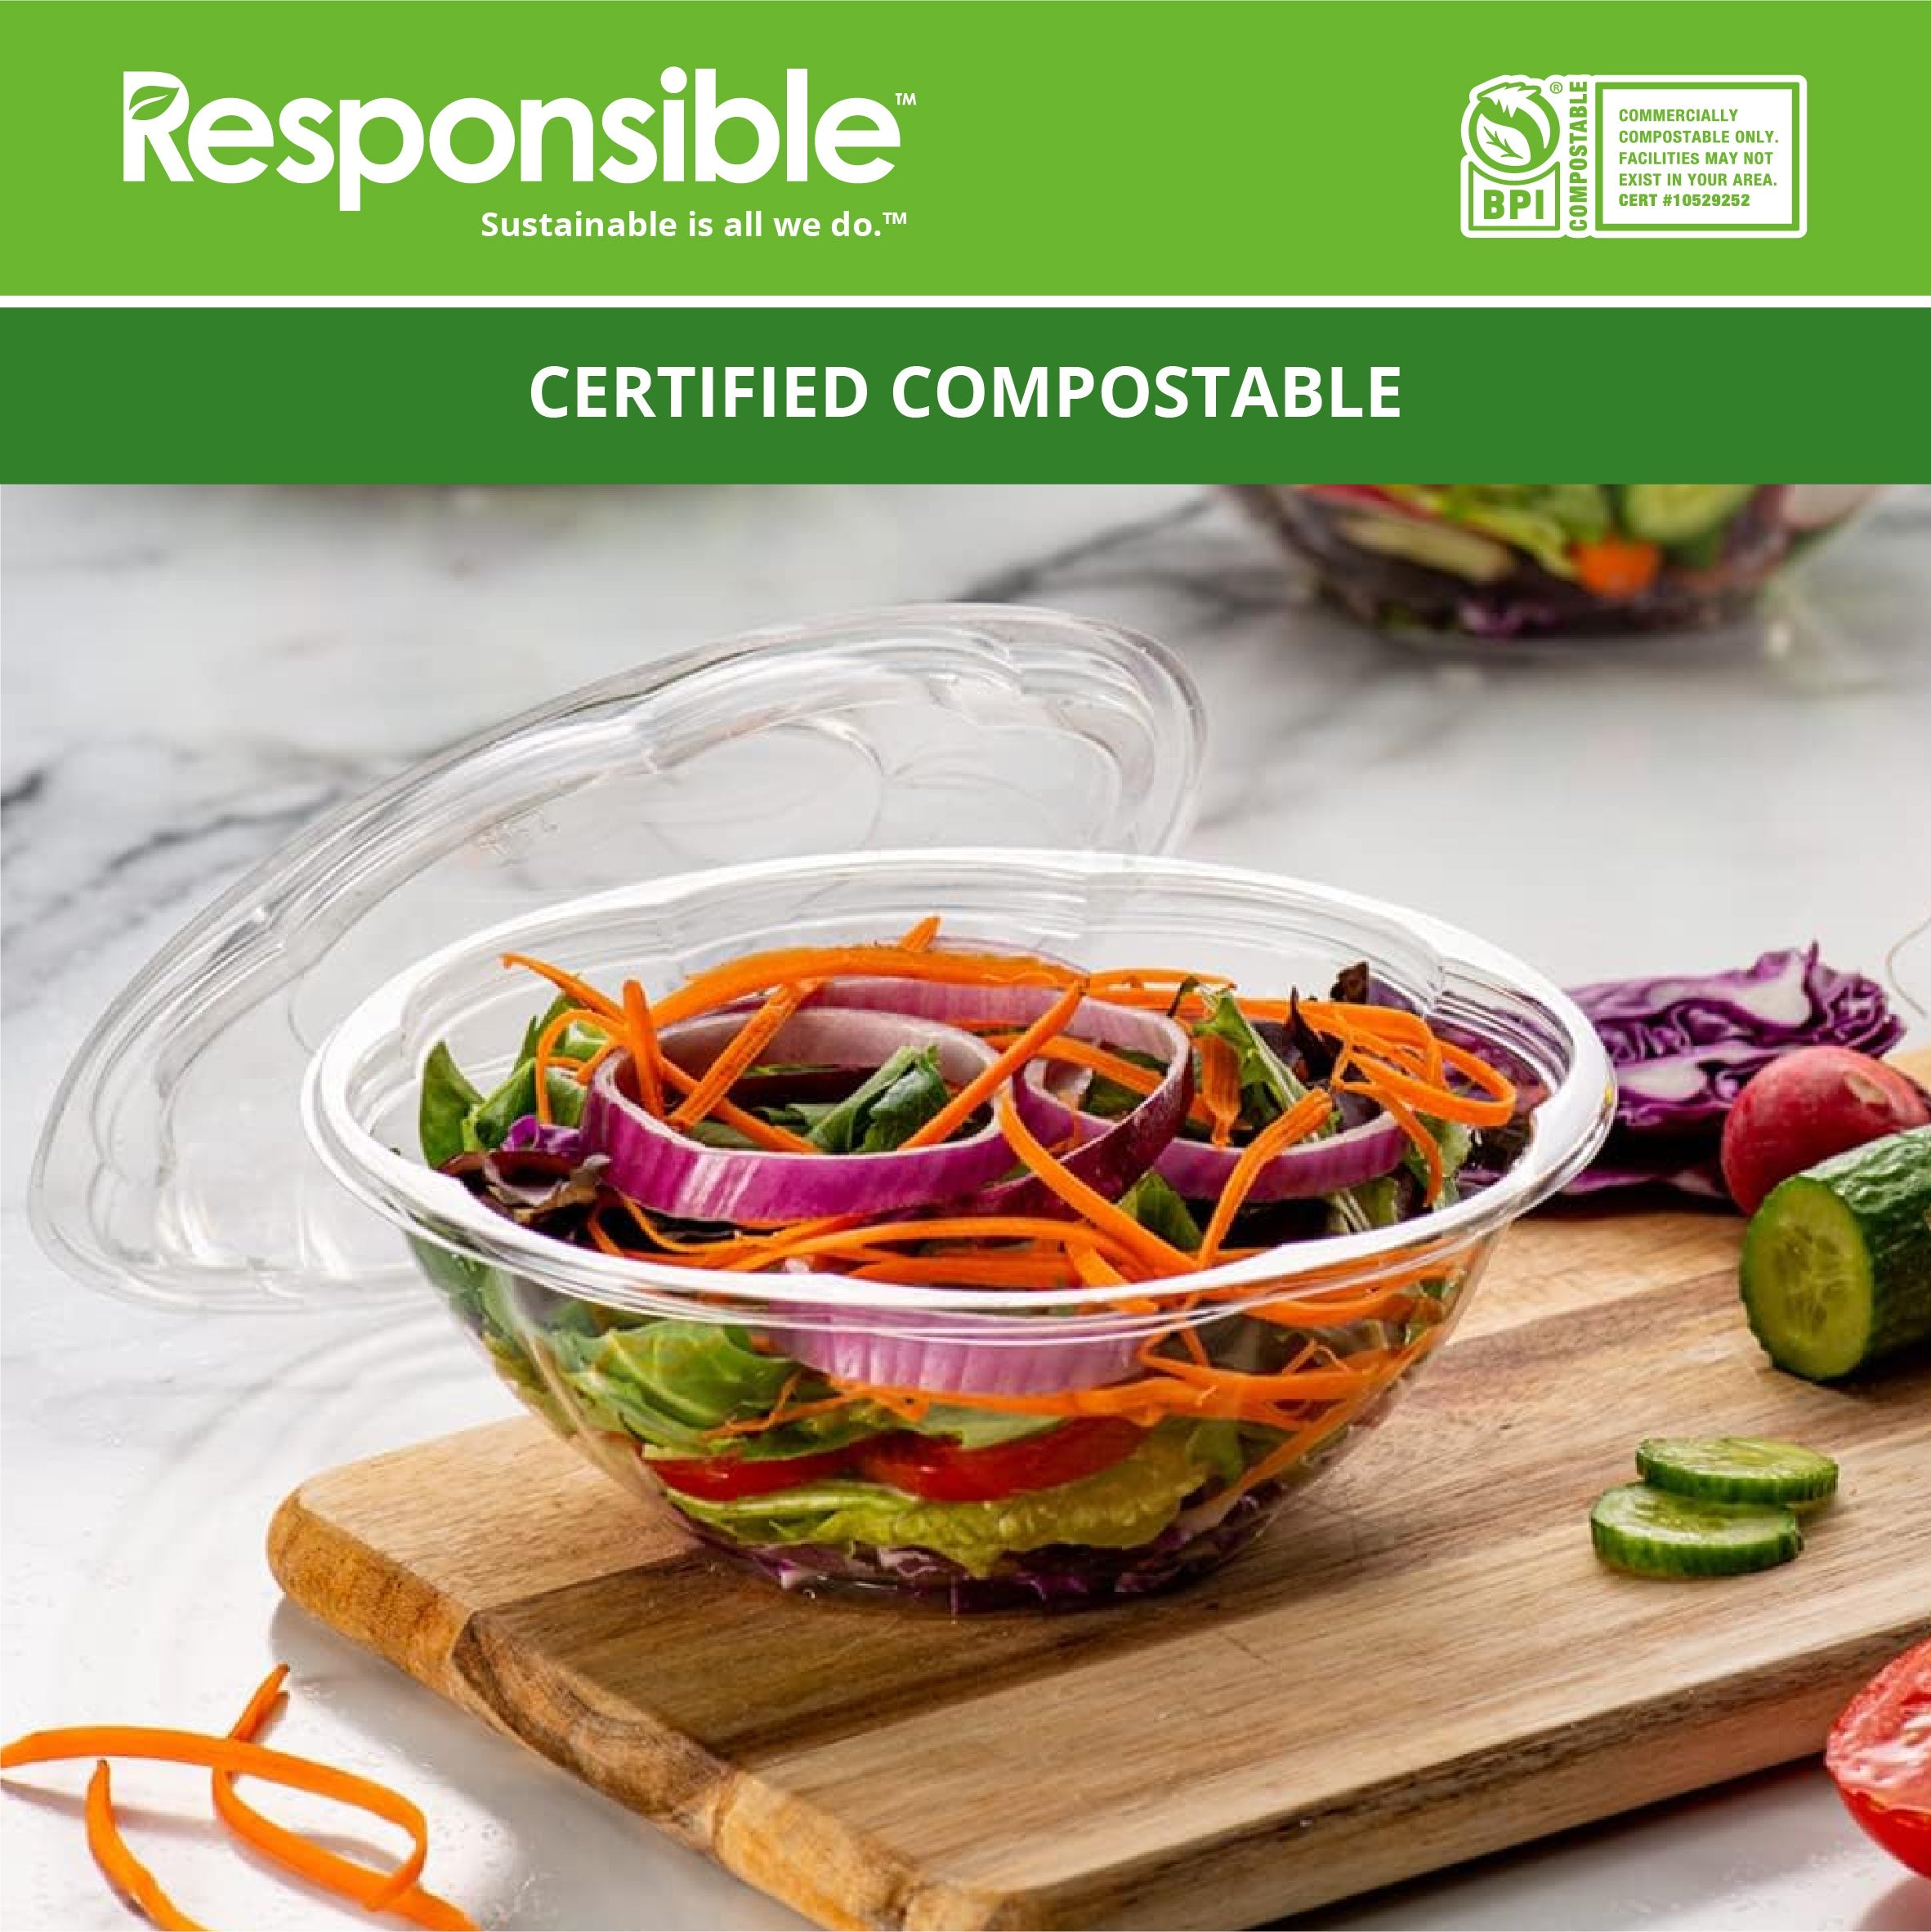 Compostable 24 oz Clear Round Salad Bowls